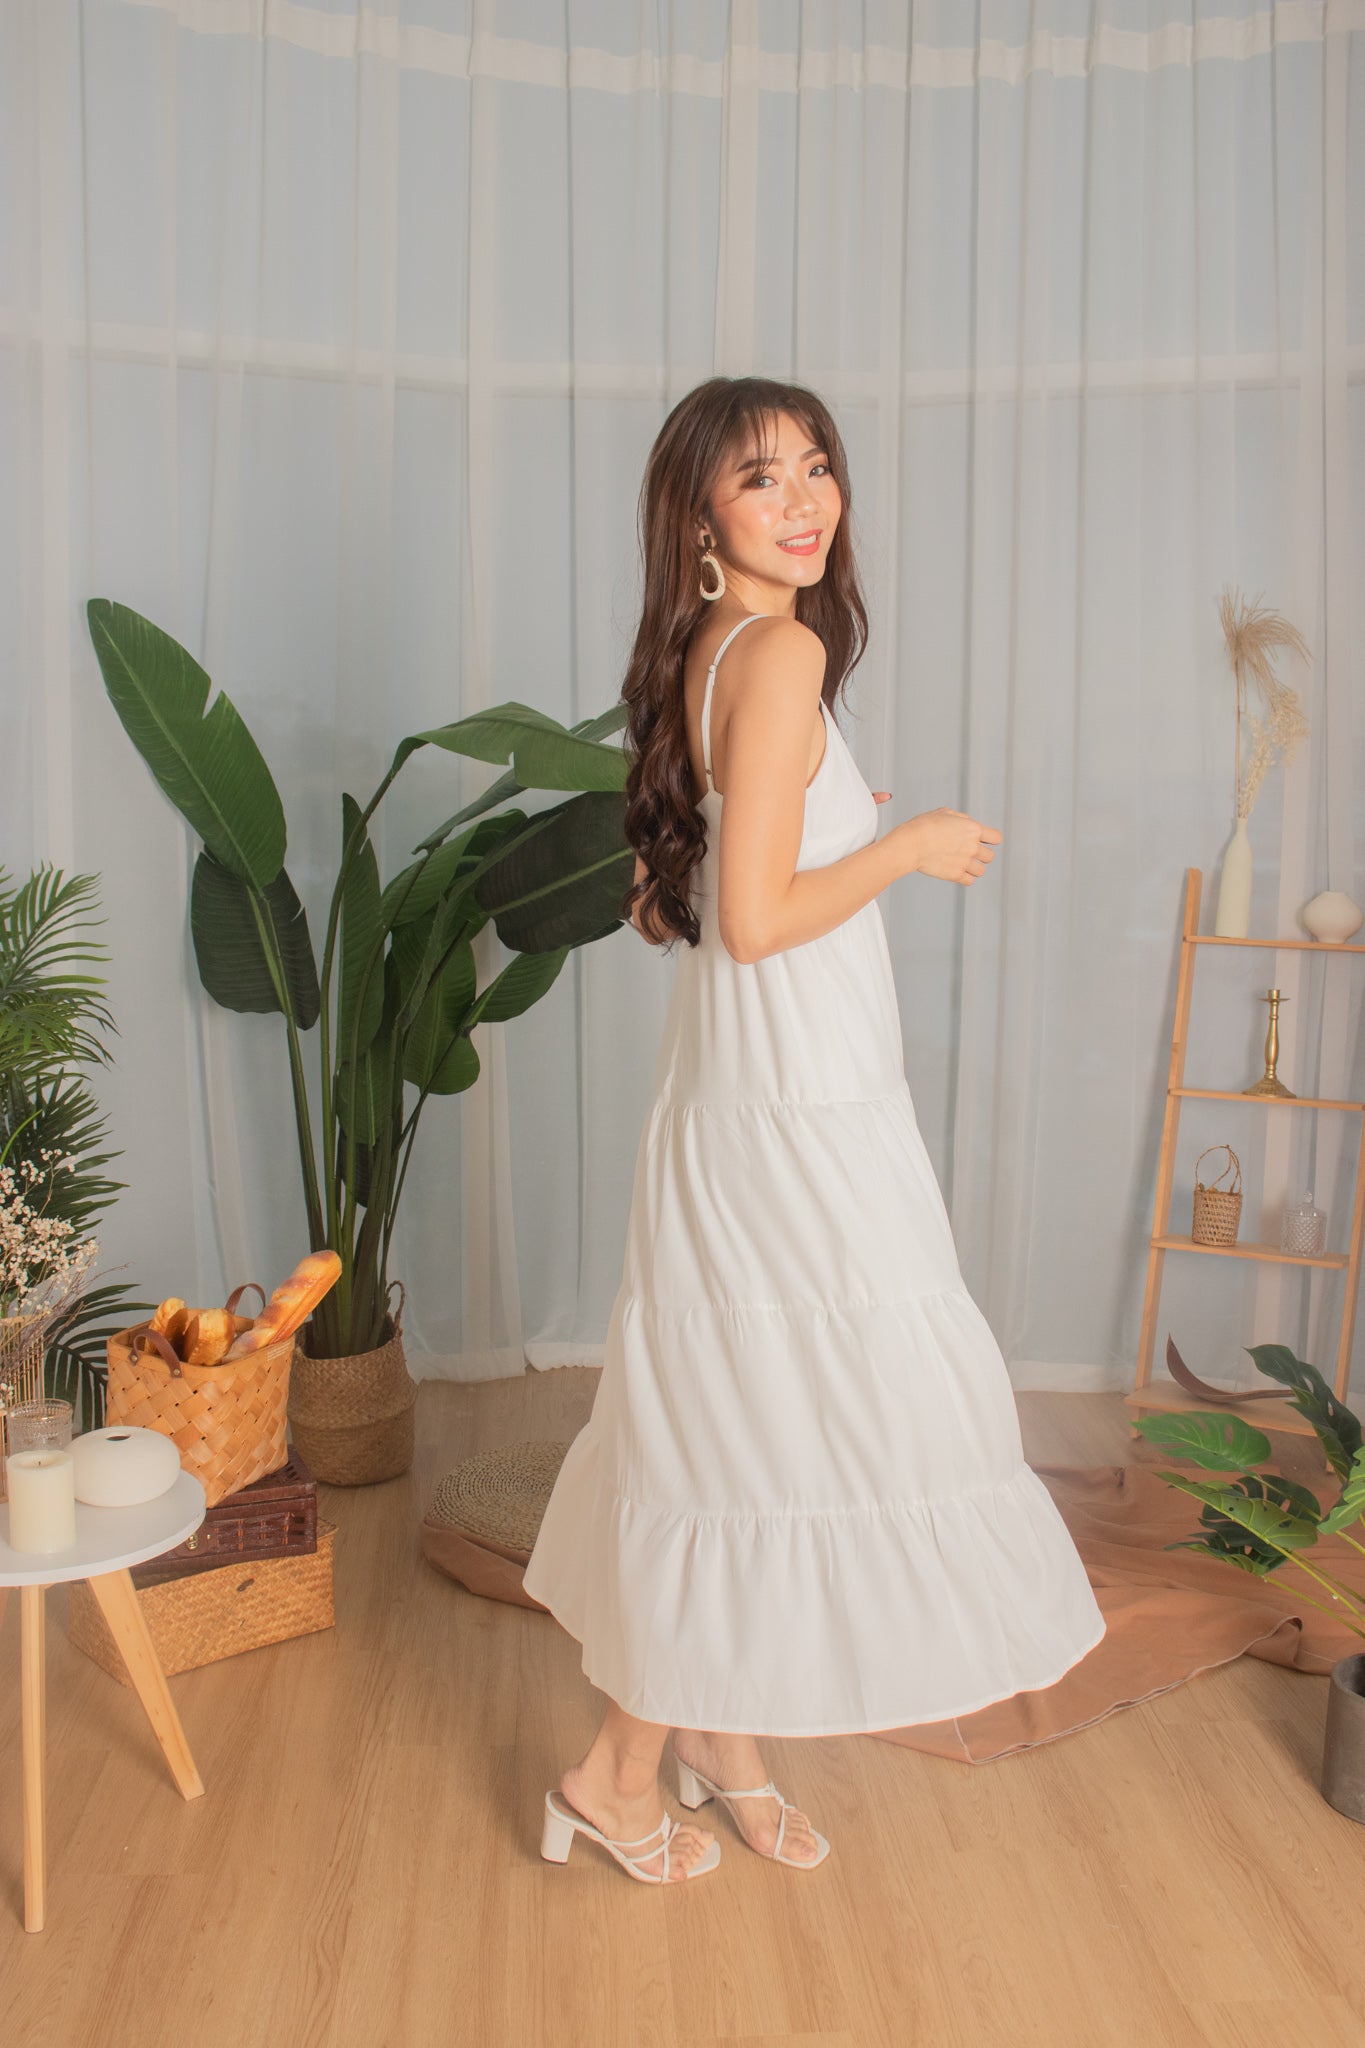 *PREMIUM* - Joeylia Tiered Maxi Dress in White - Self Manufactured by LBRLABEL